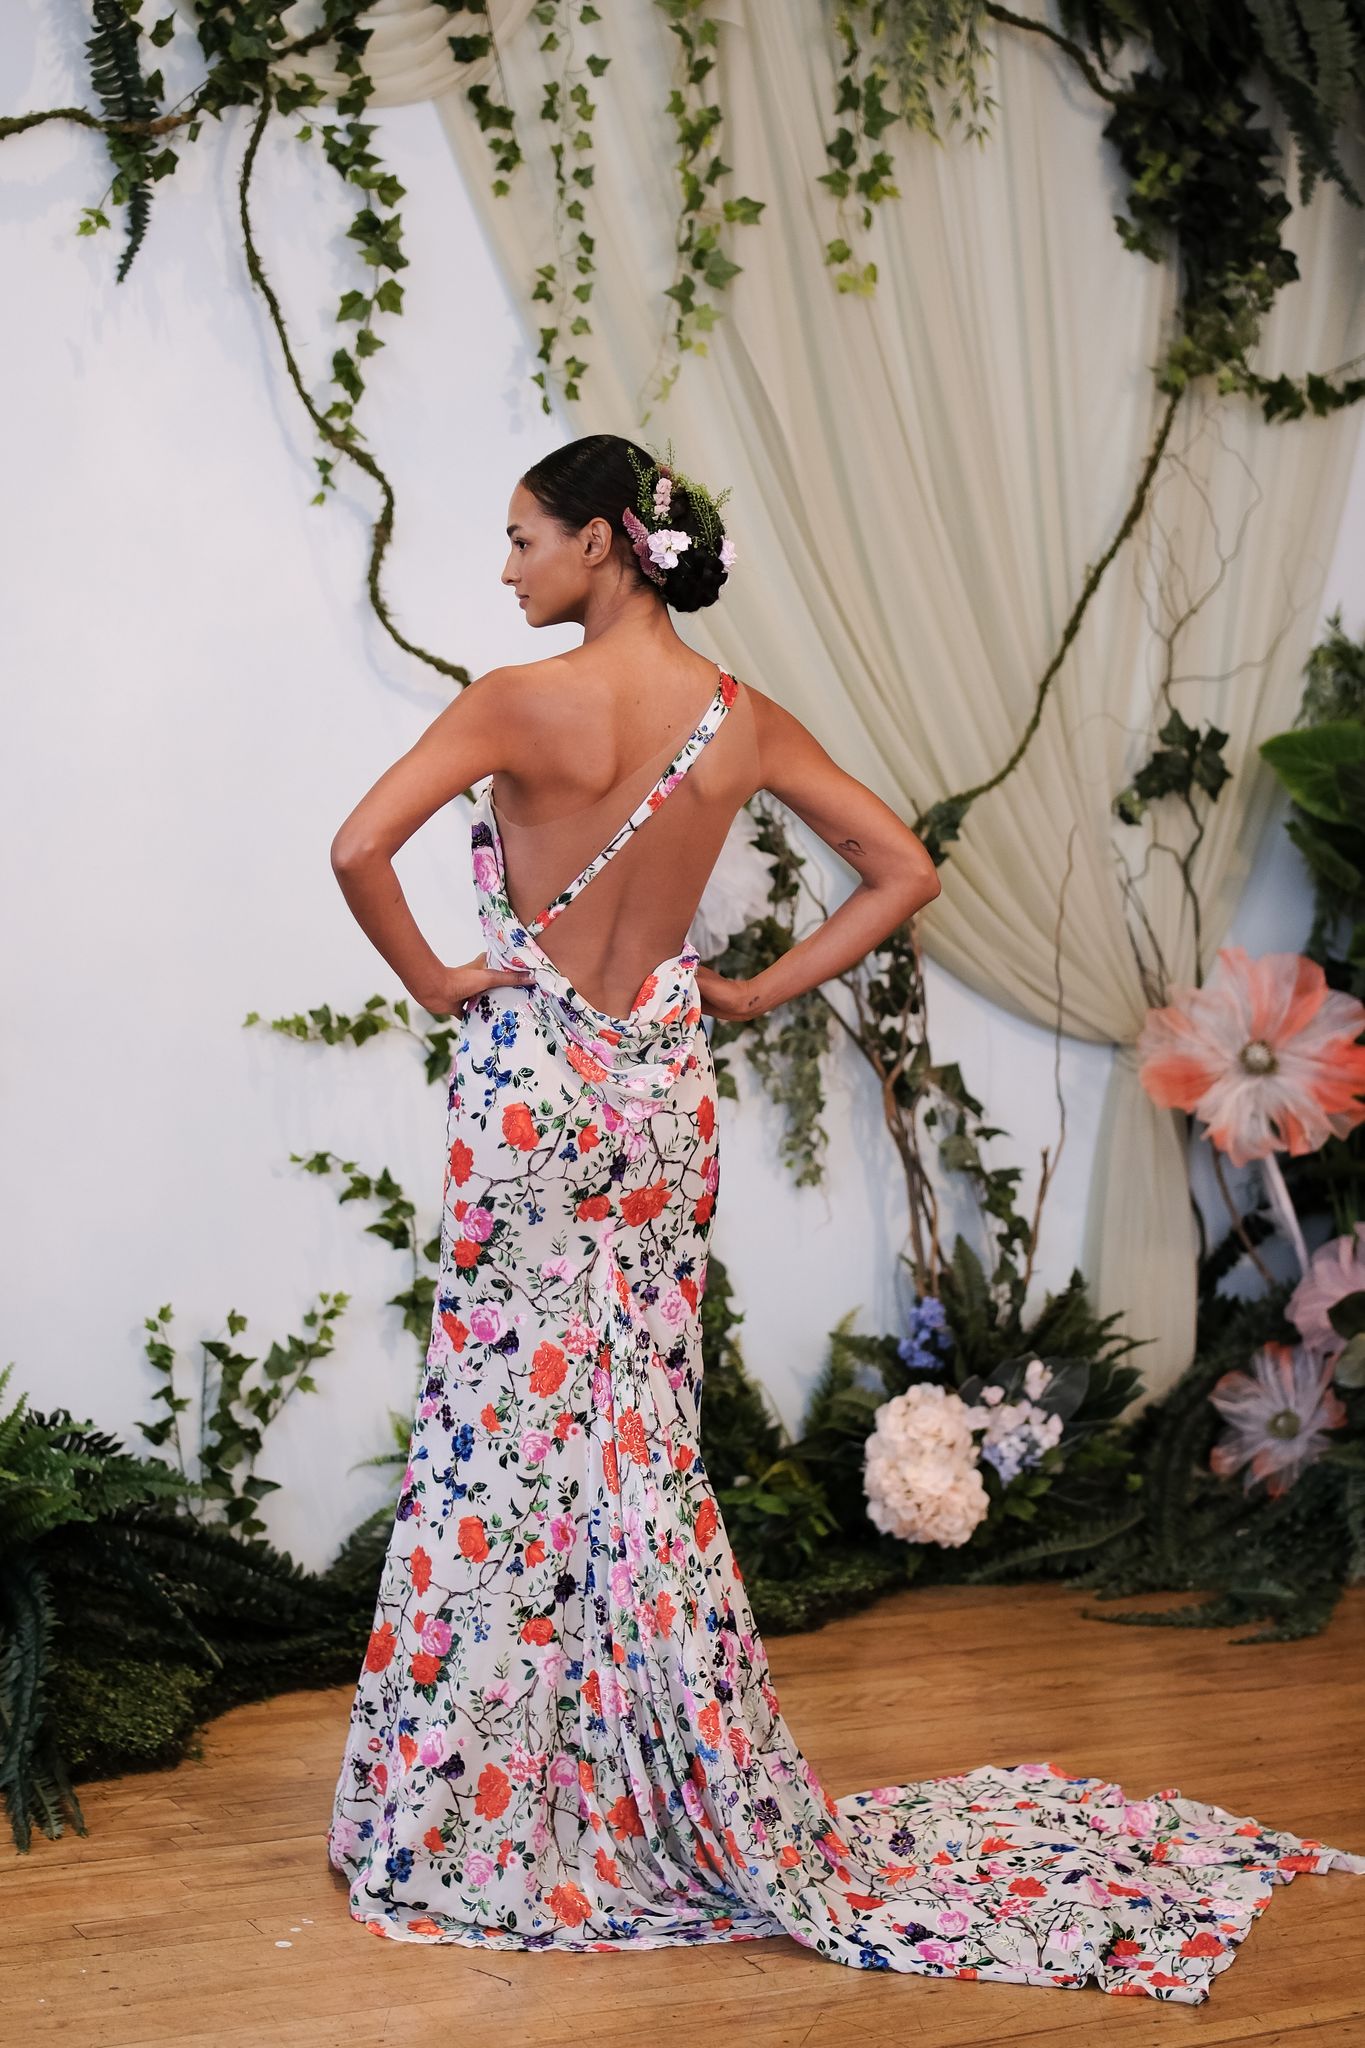 White dress covered with bright, colorful floral pattern. Dress has a statement open back with a singular strap of the same floral print across the back from the right shoulder to left low back. 